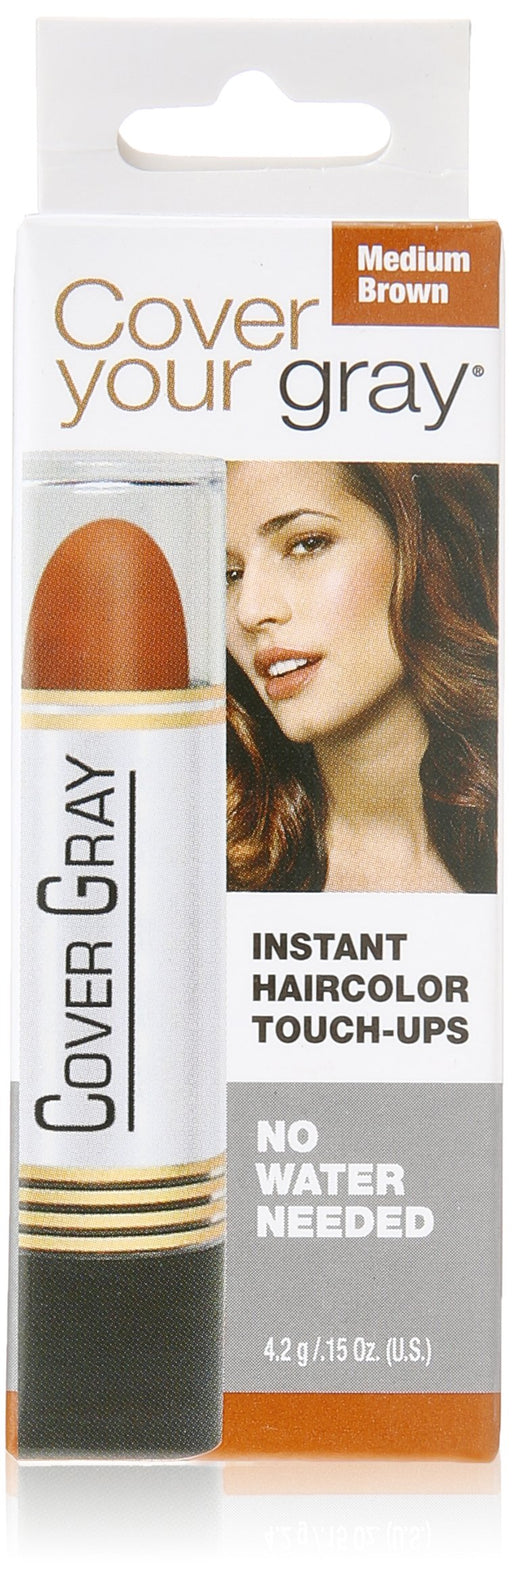 Cover Your Gray Color Stick - Medium Brown